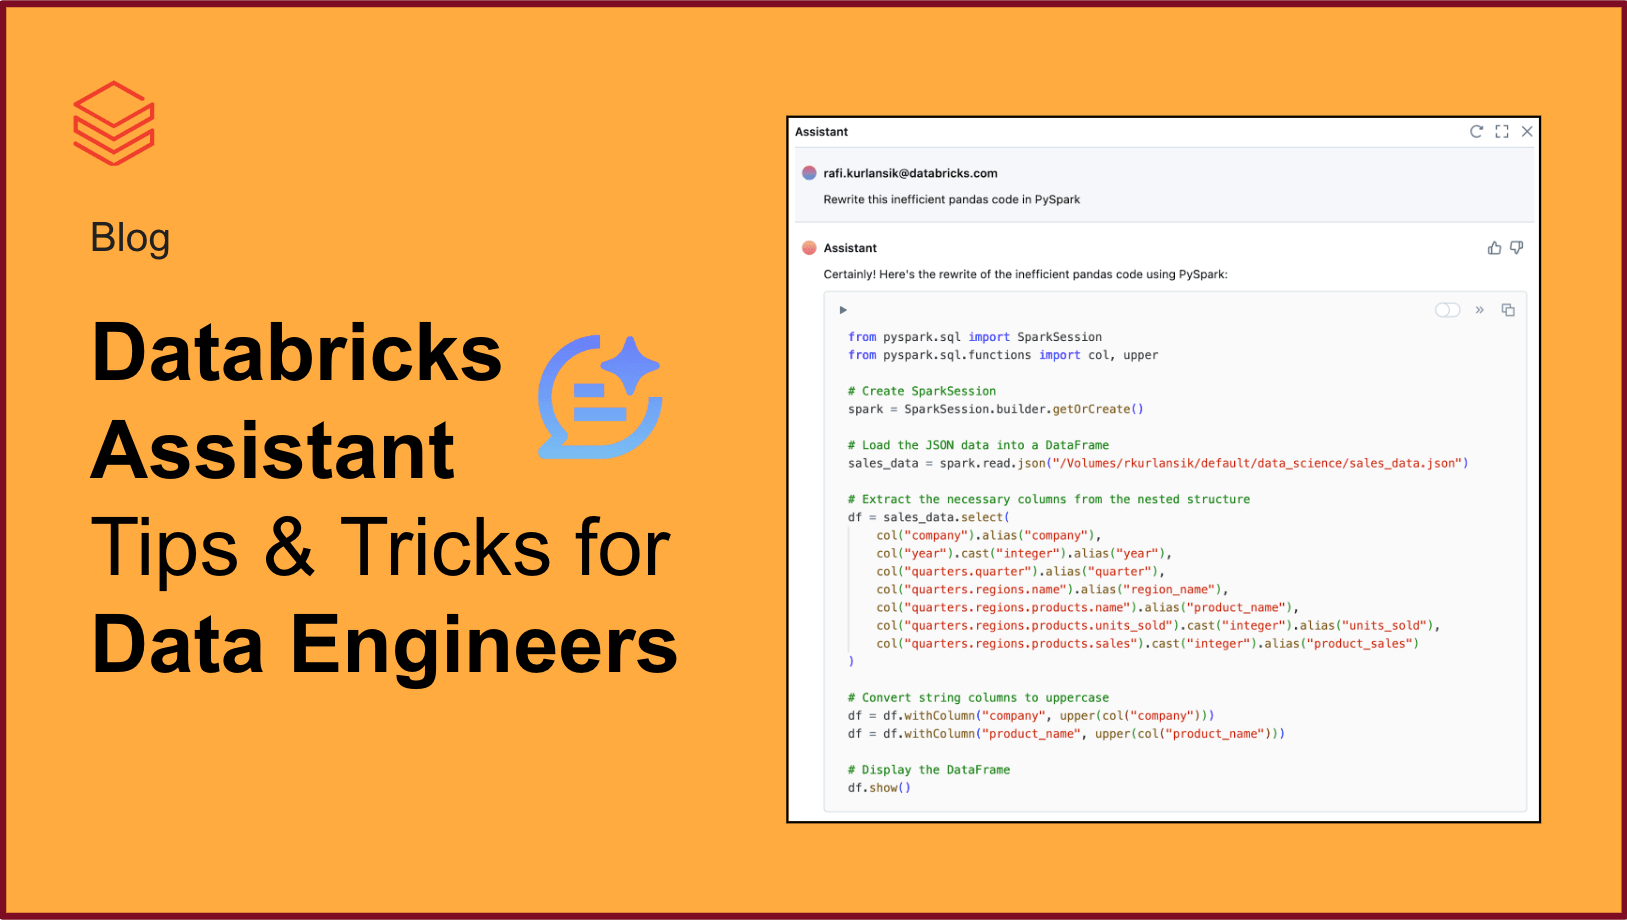 Databricks Assistant Tips & Tricks for Data Engineers